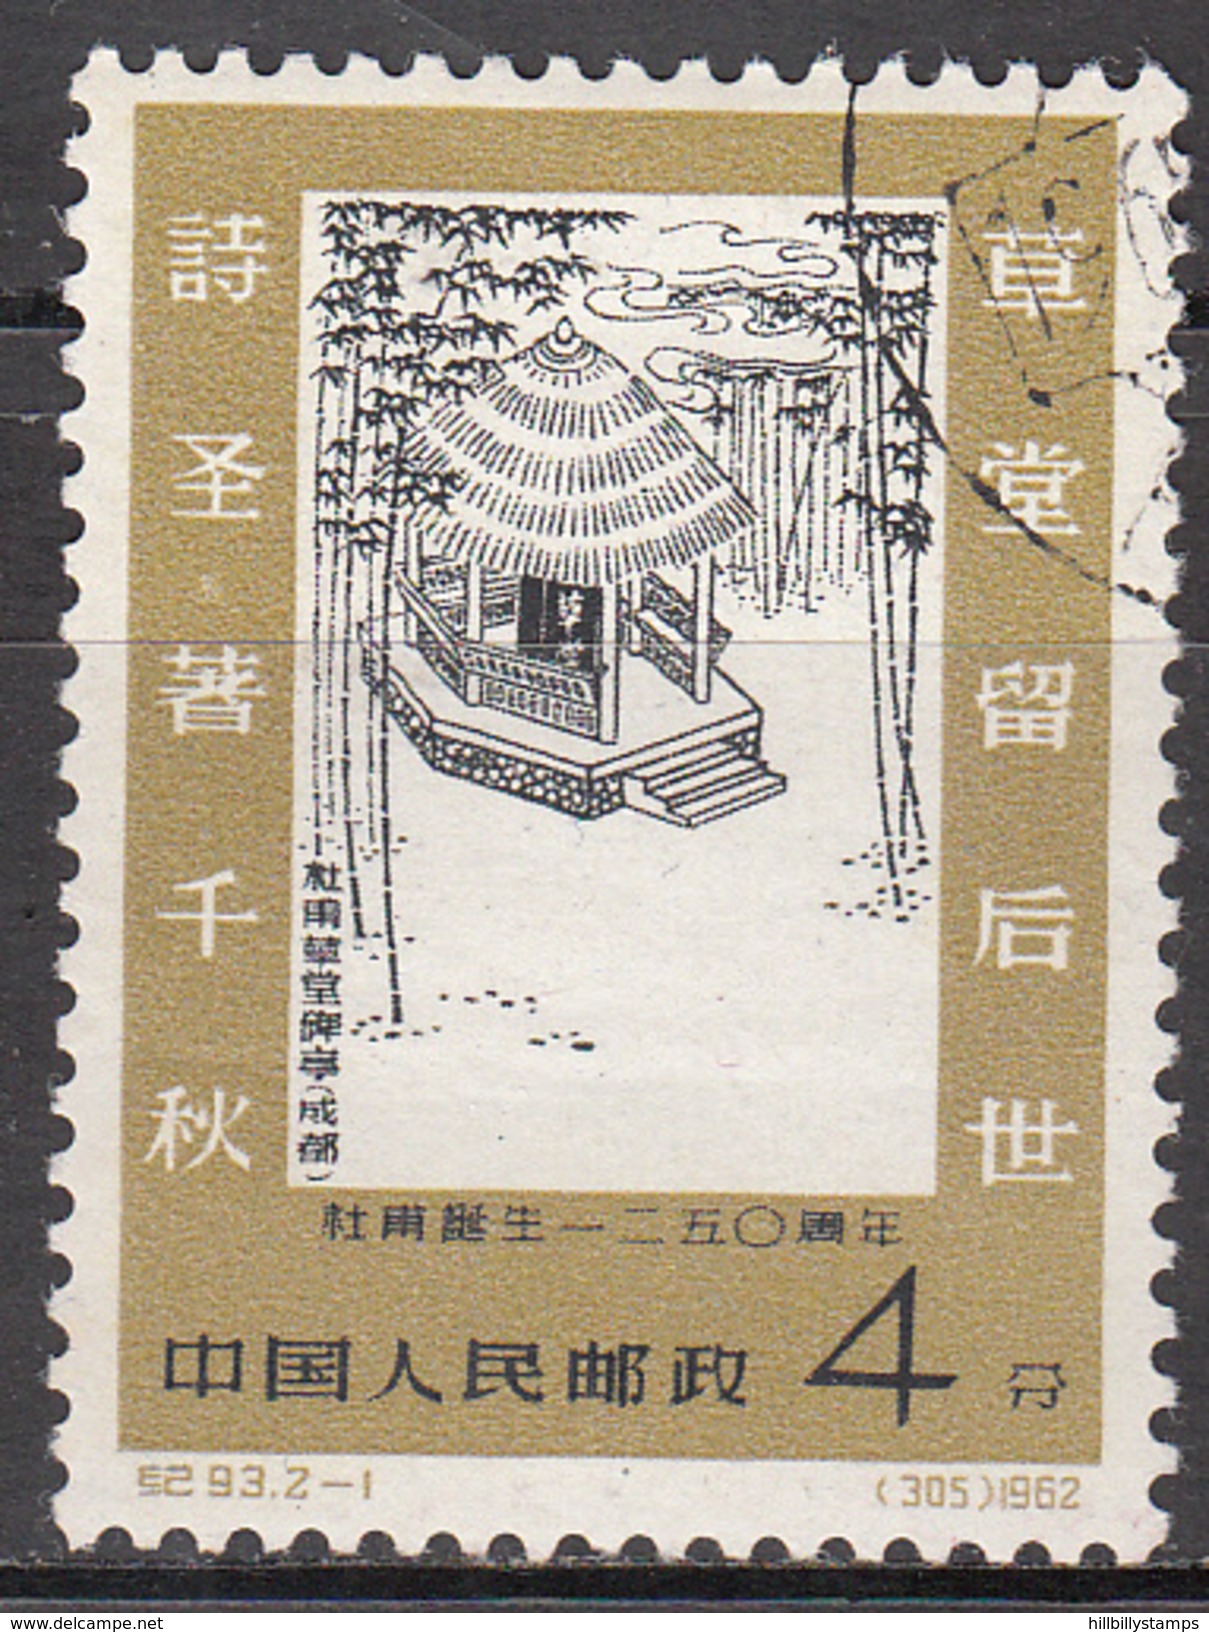 CHINA  PRC     SCOTT NO. 610     USED      YEAR 1962 - Used Stamps